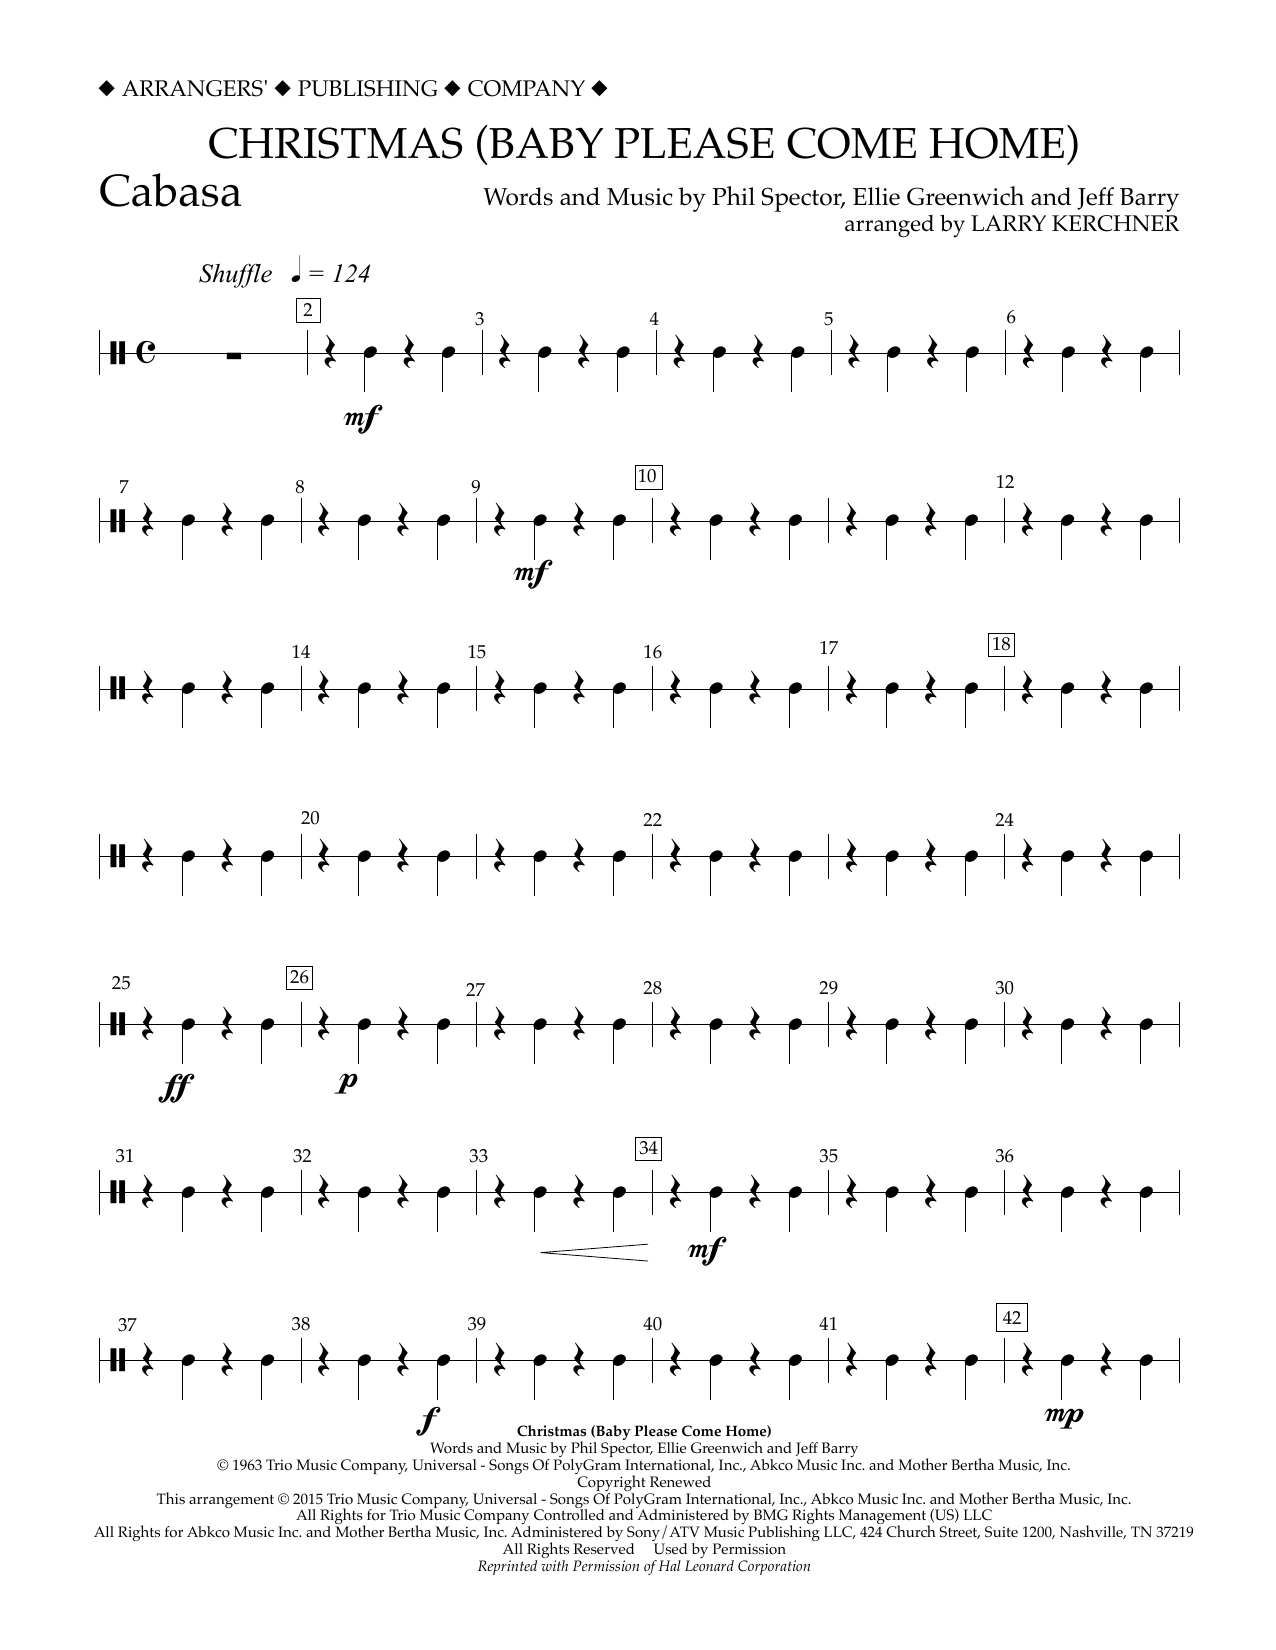 Download Larry Kerchner Christmas (Baby Please Come Home) - Cab Sheet Music